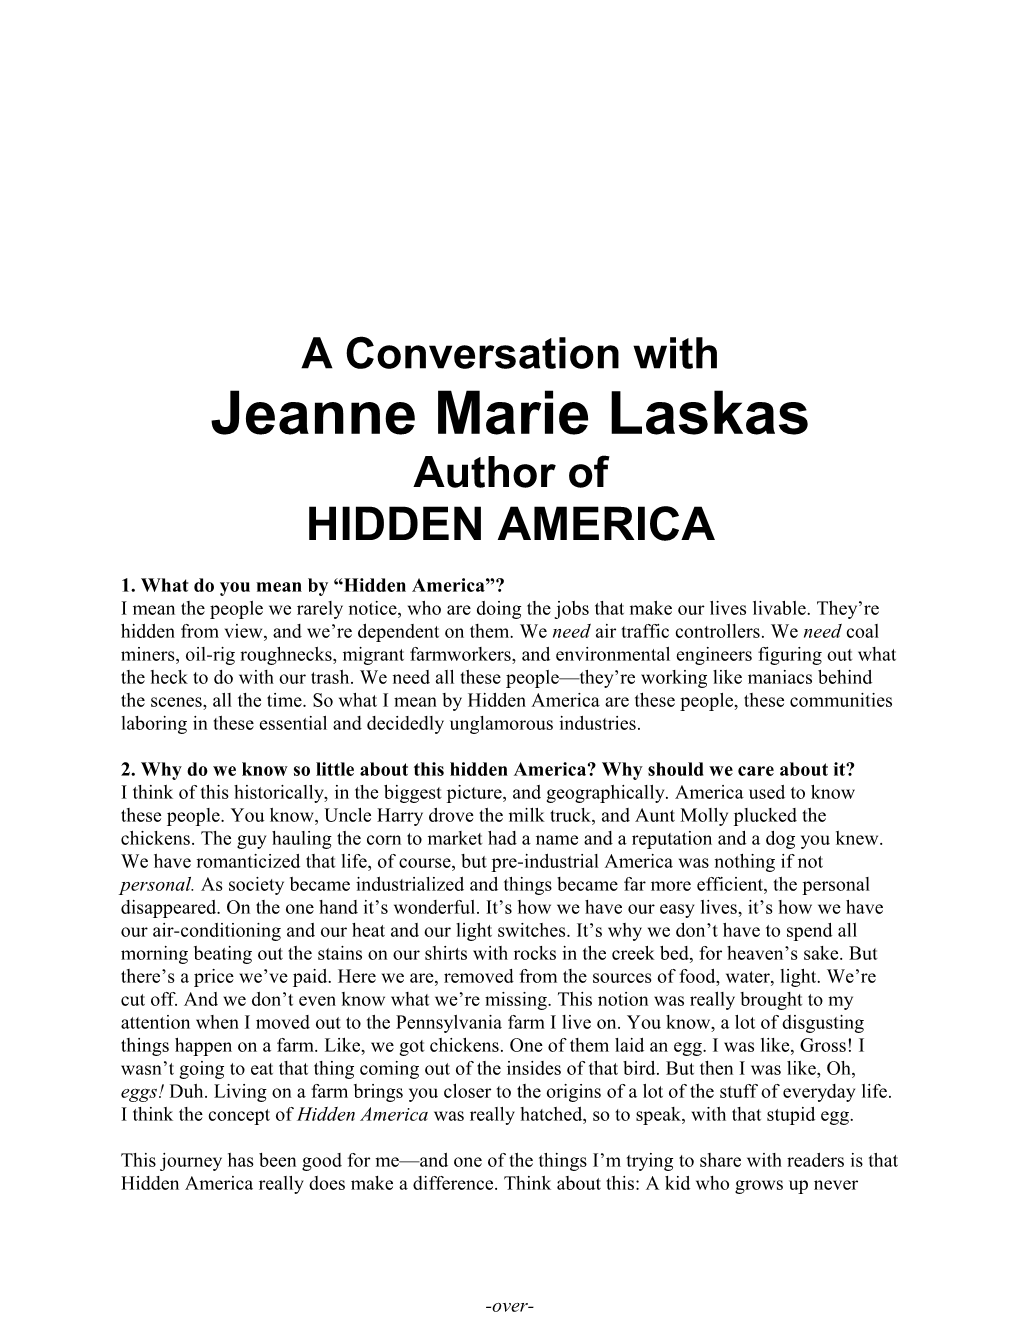 A Conversation with Jeanne Marie Laskas, Author of HIDDEN AMERICA Page 1 of 7